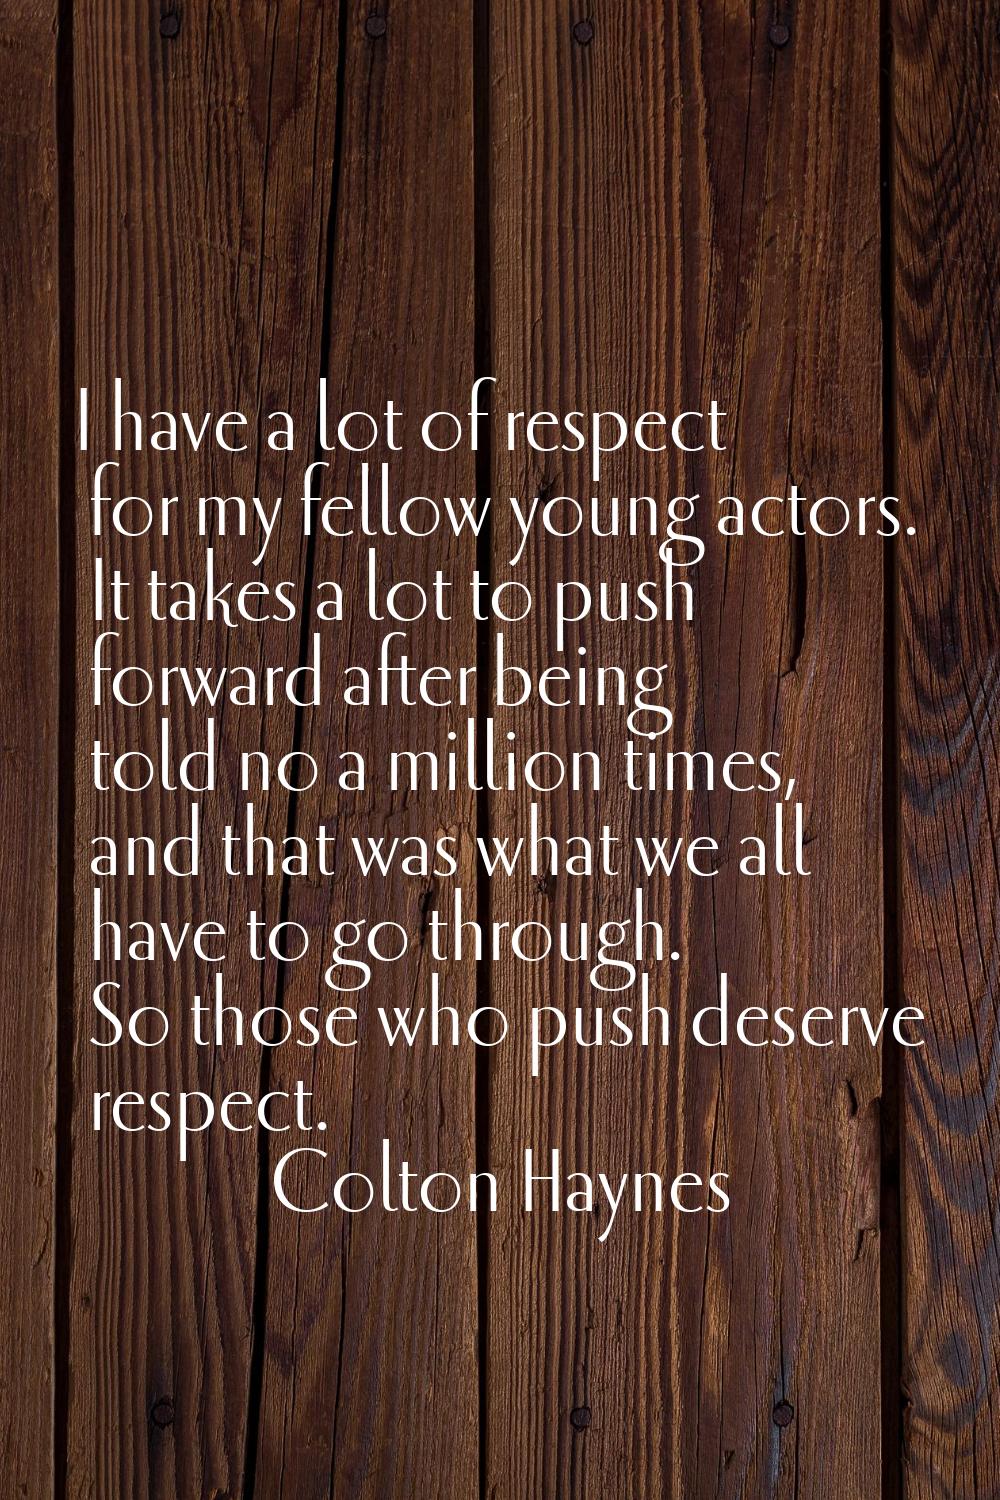 I have a lot of respect for my fellow young actors. It takes a lot to push forward after being told